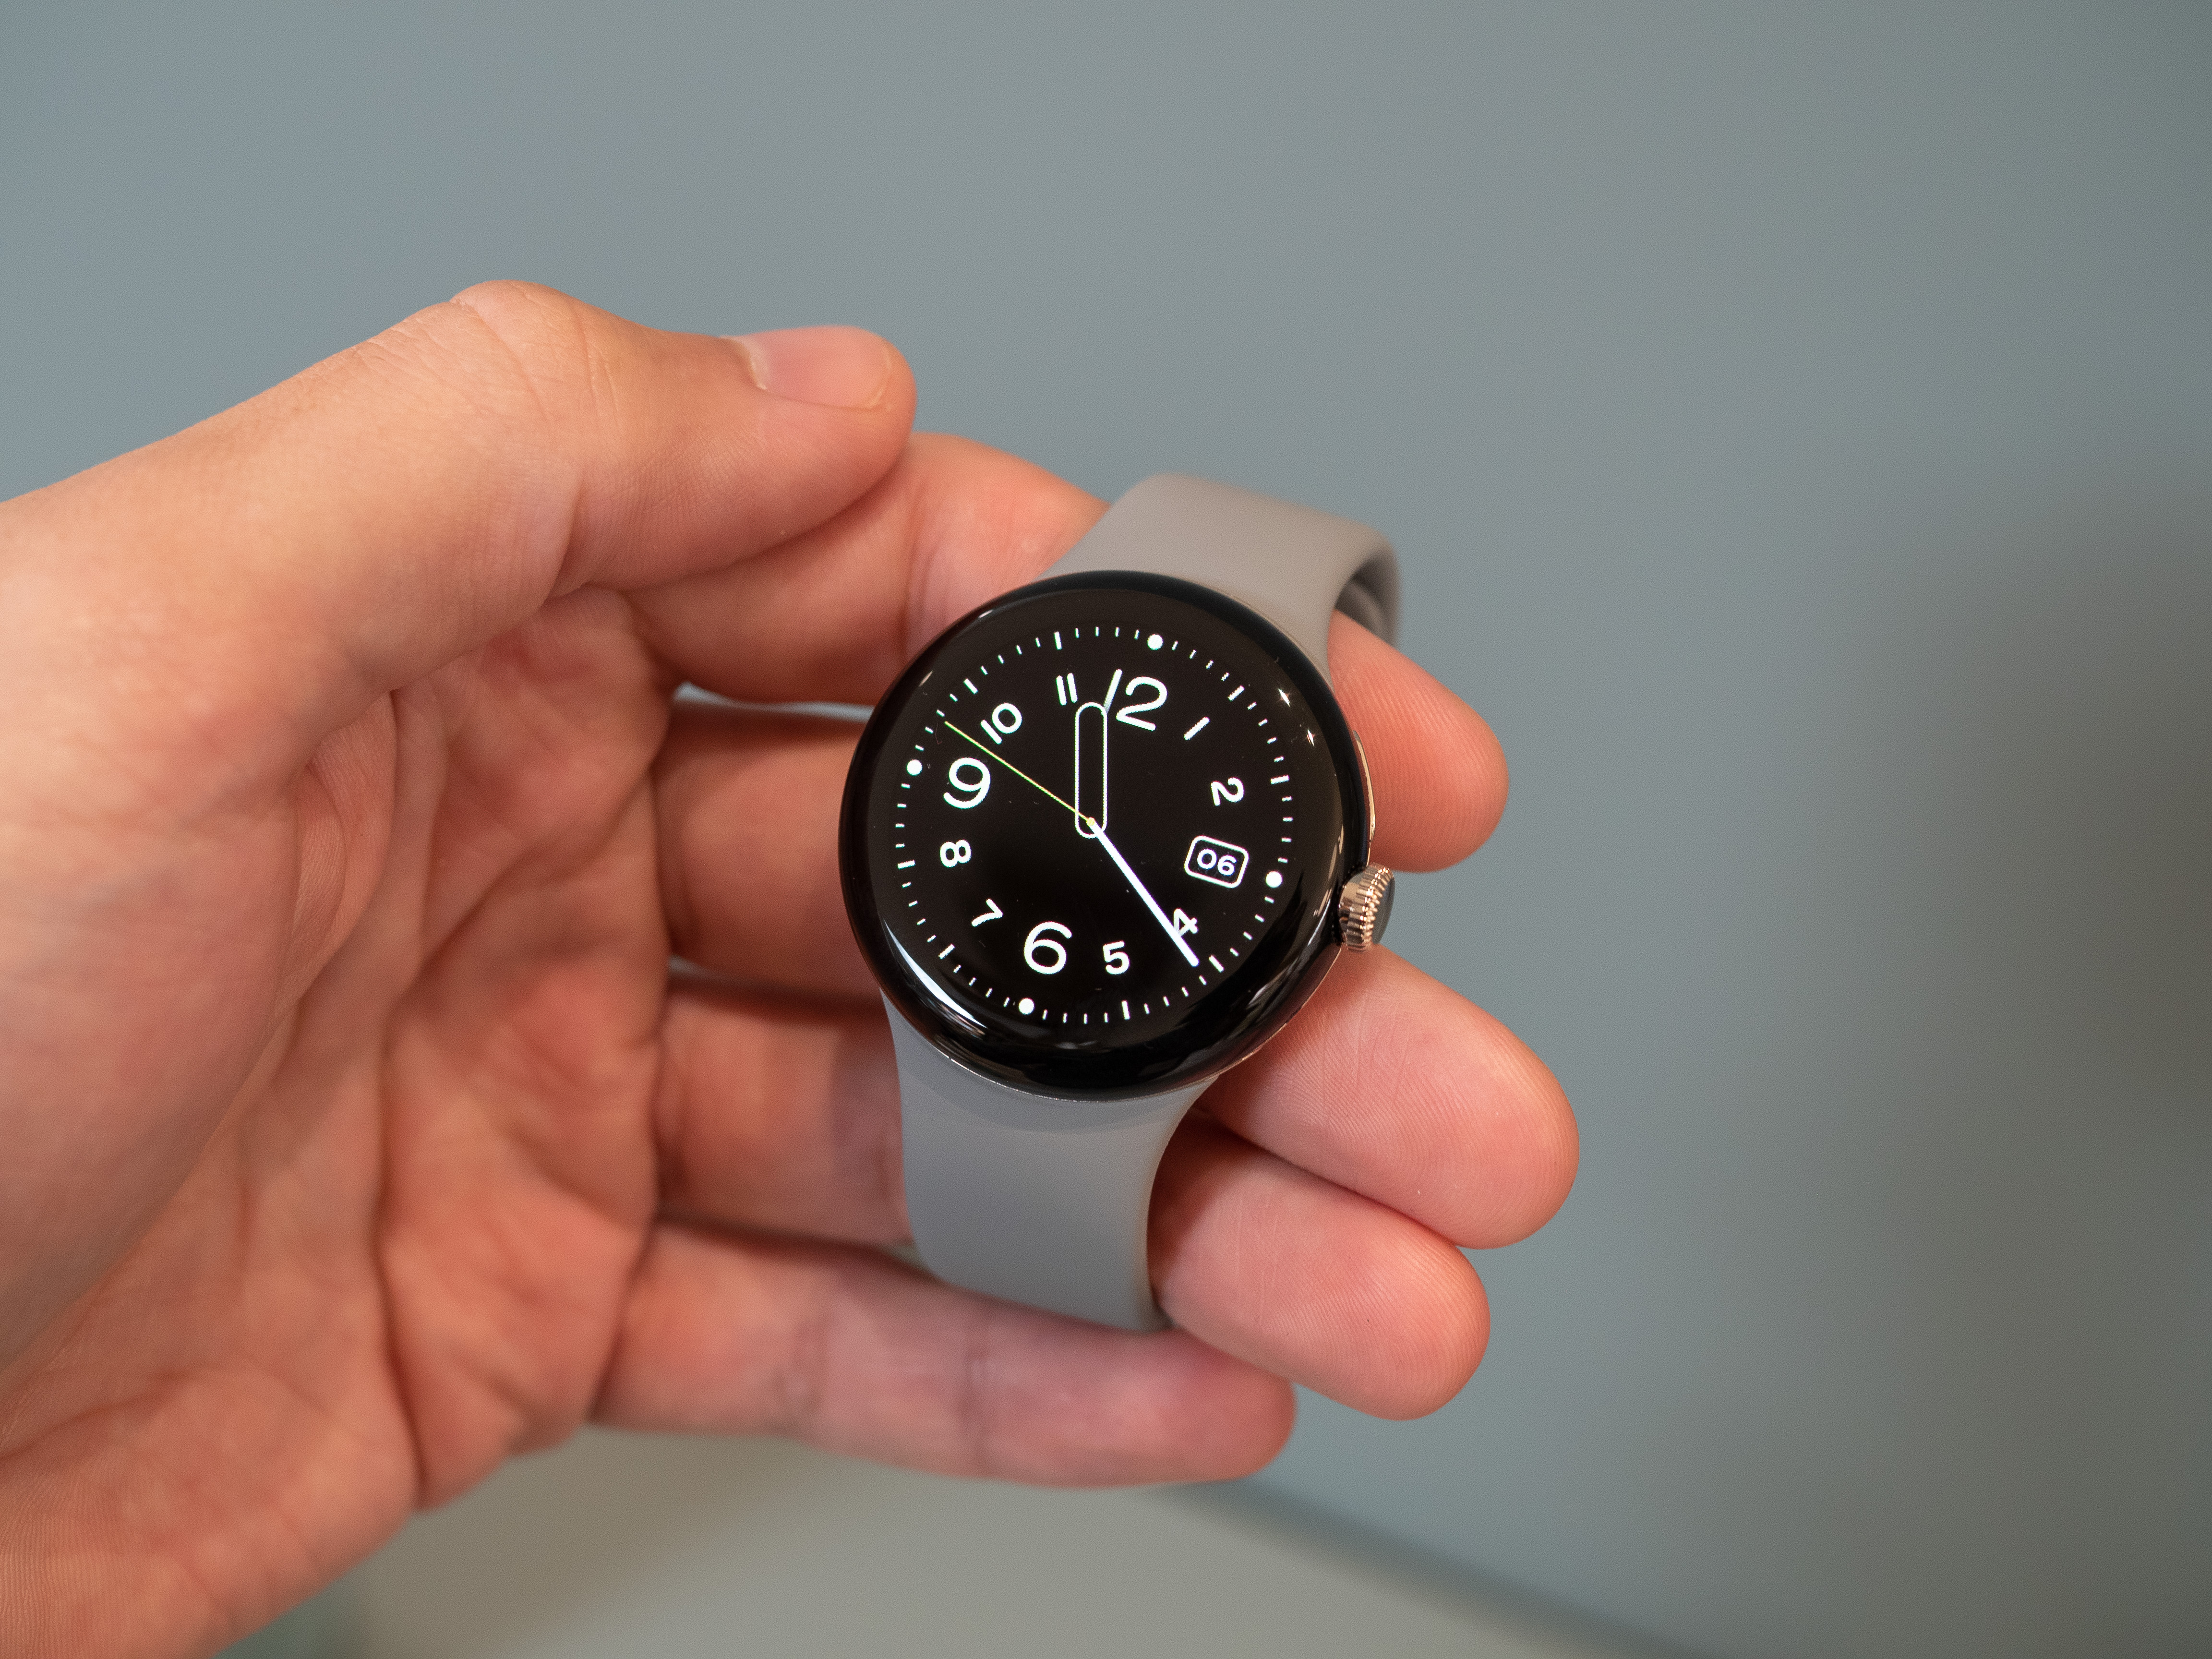 Google's Pixel Watch Hands-On: Here's What You Need to Know